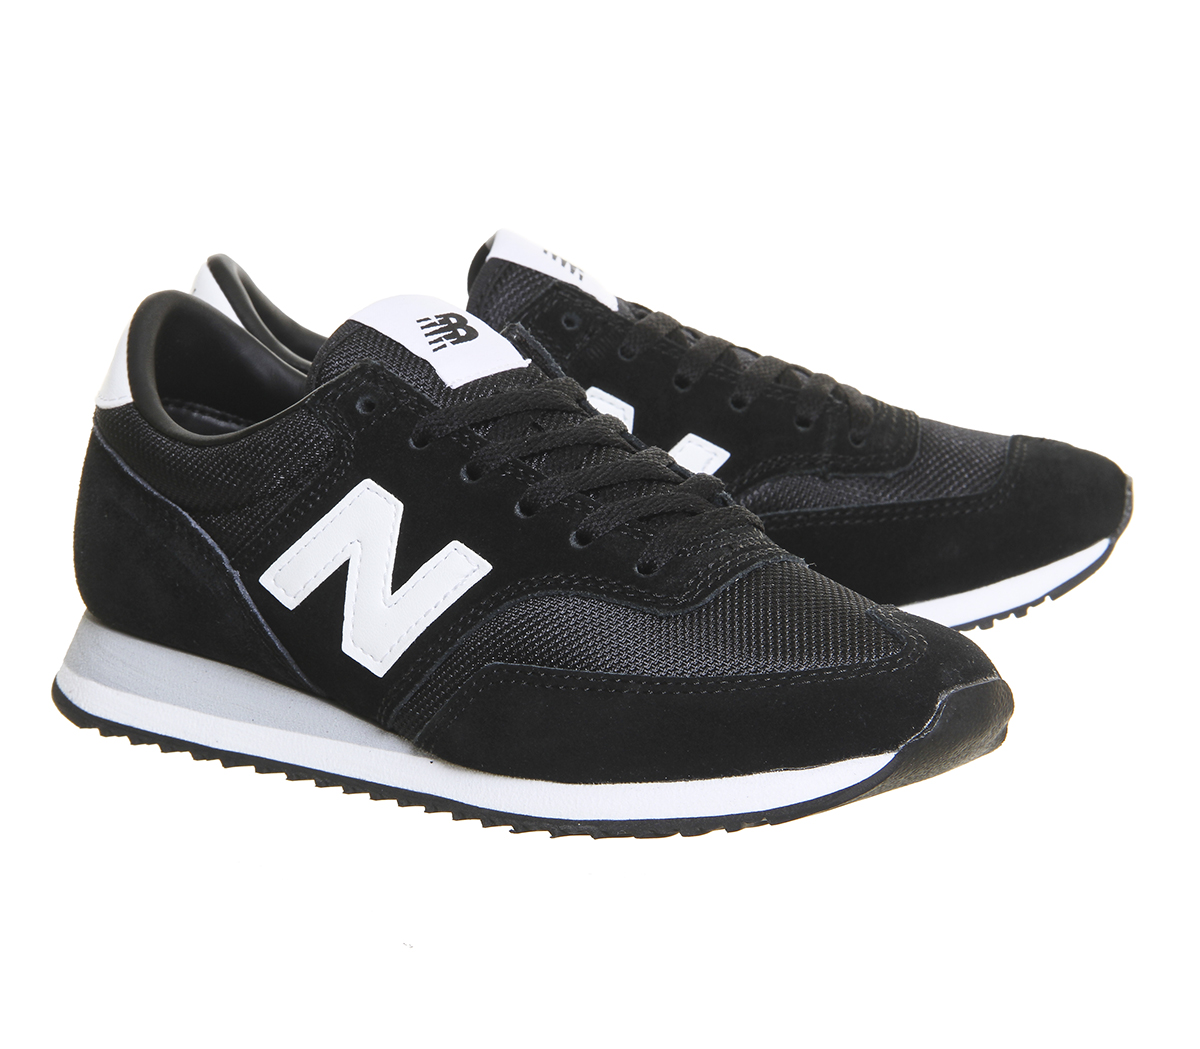 New Balance 620 Trainers Cw Black White Grey Exclusive - Unisex Sports